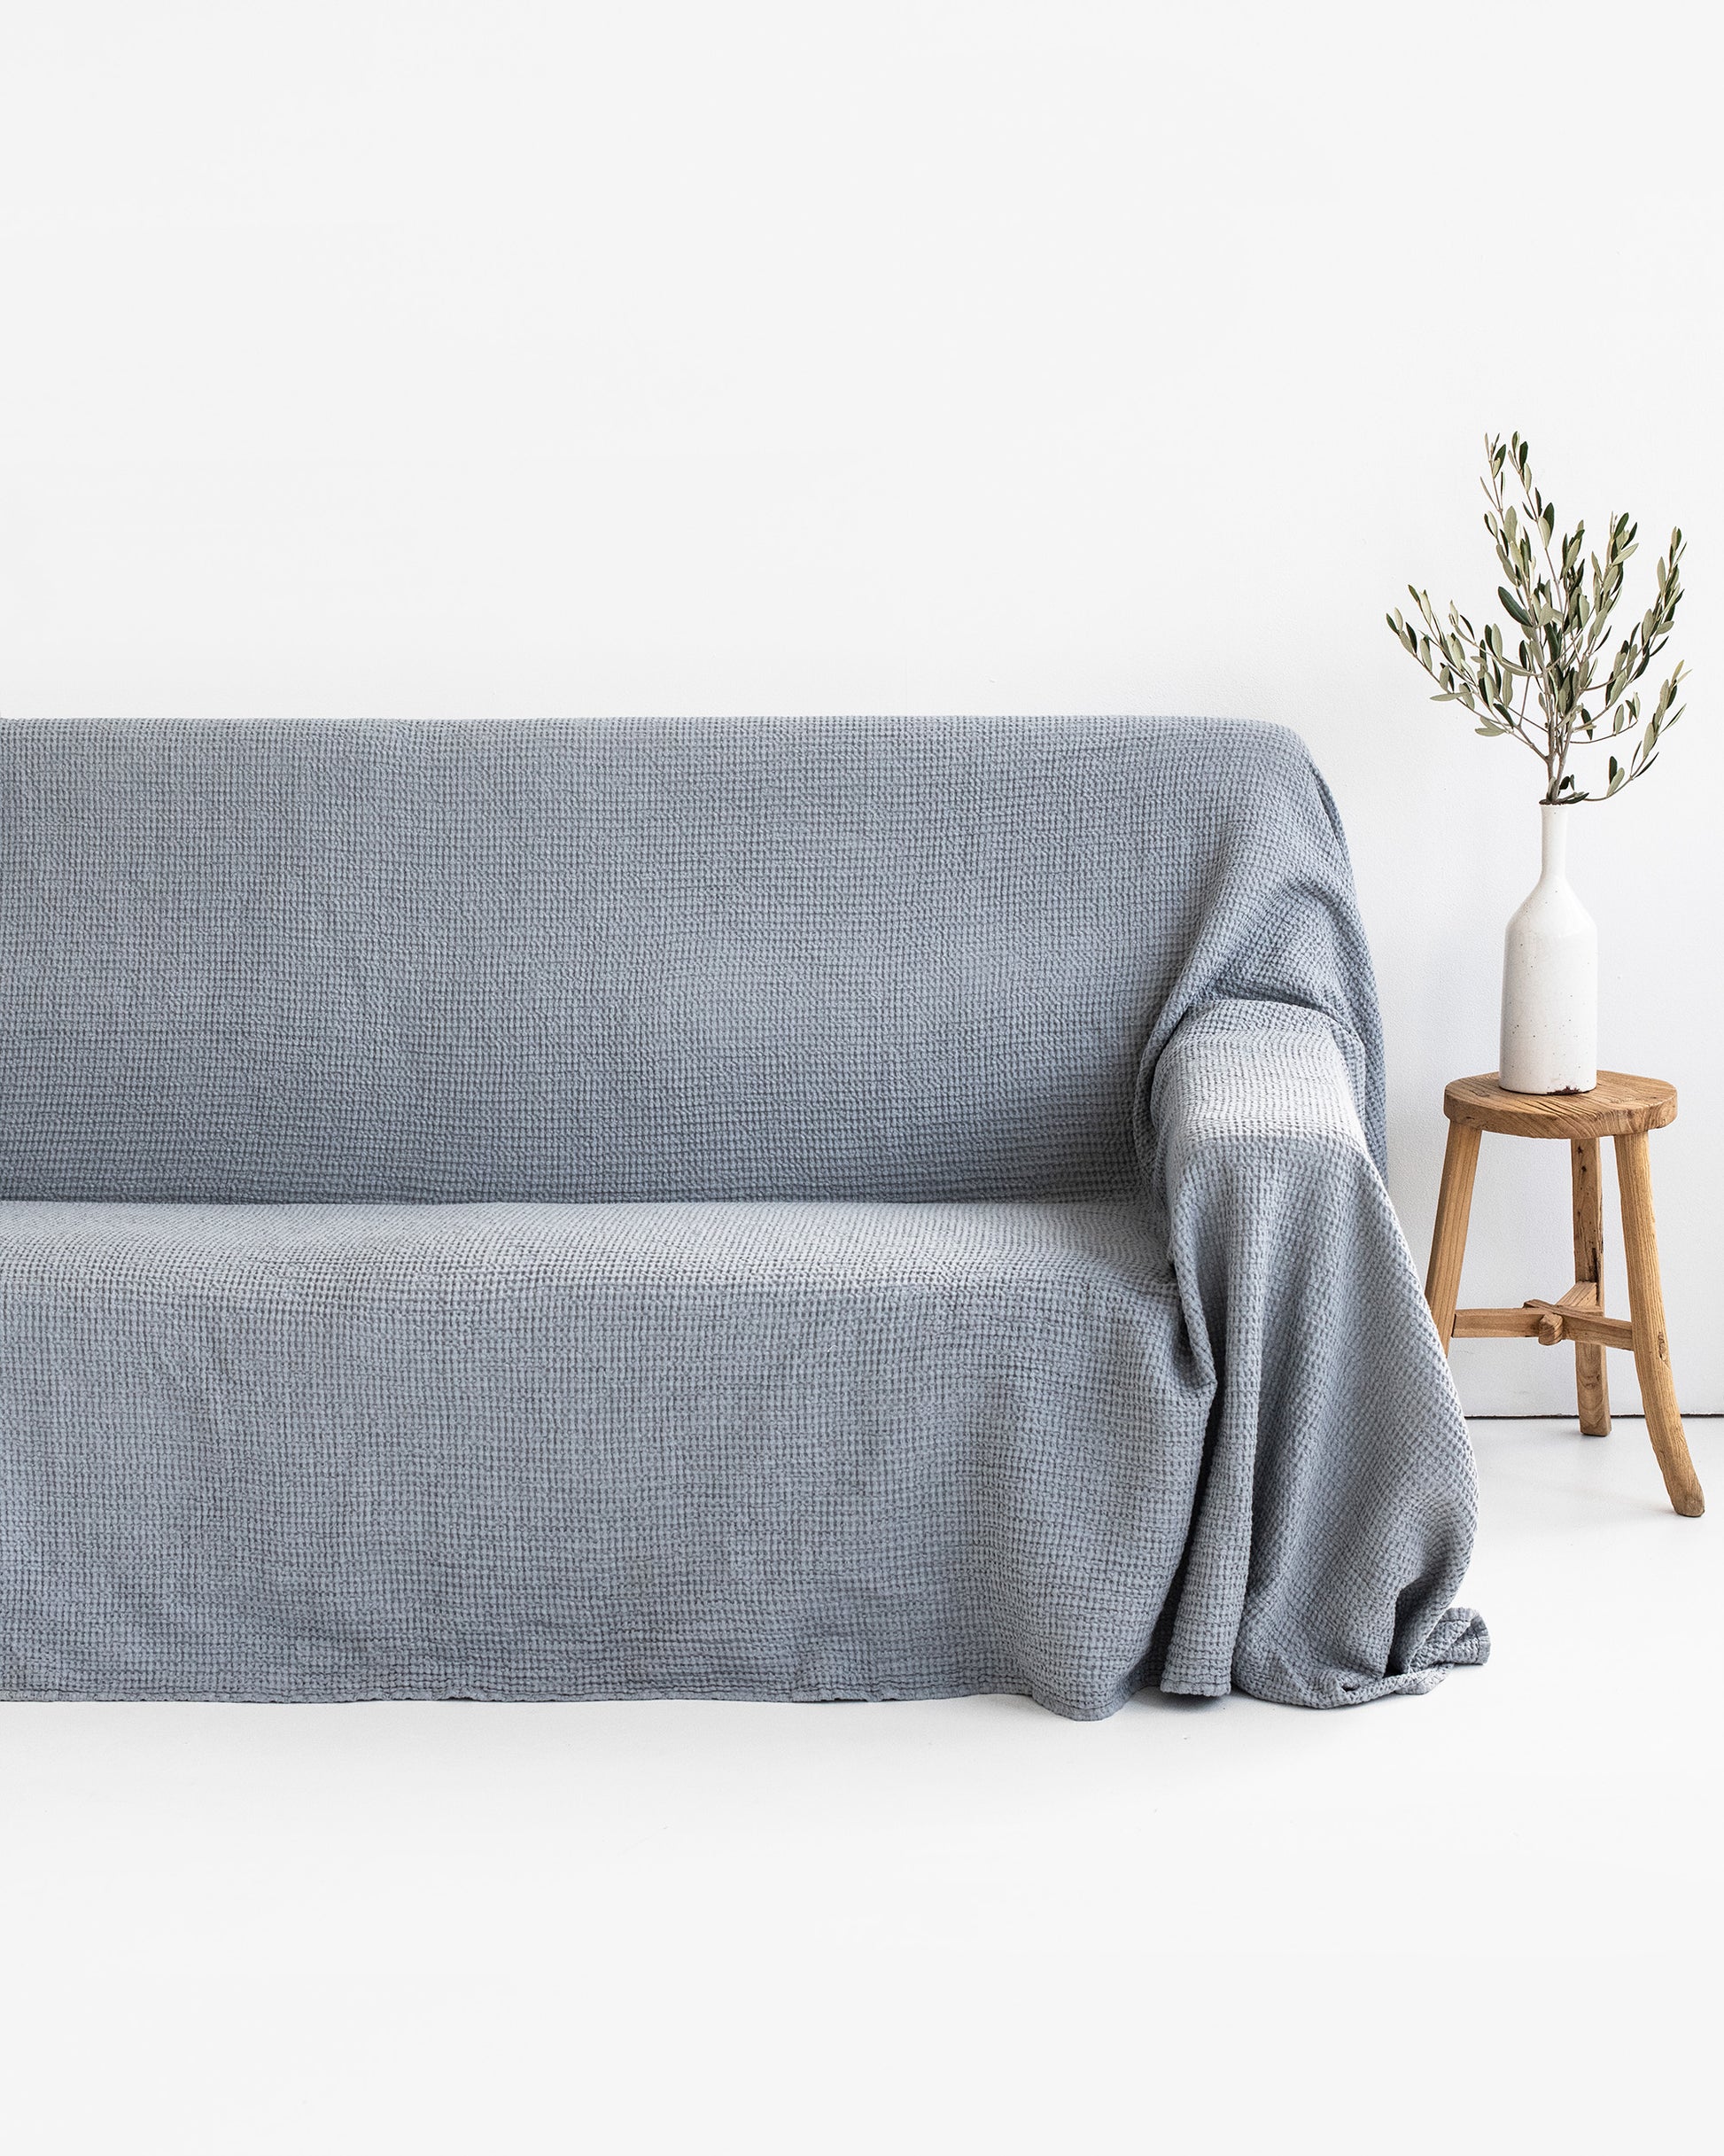 Waffle linen couch cover in Light gray - MagicLinen